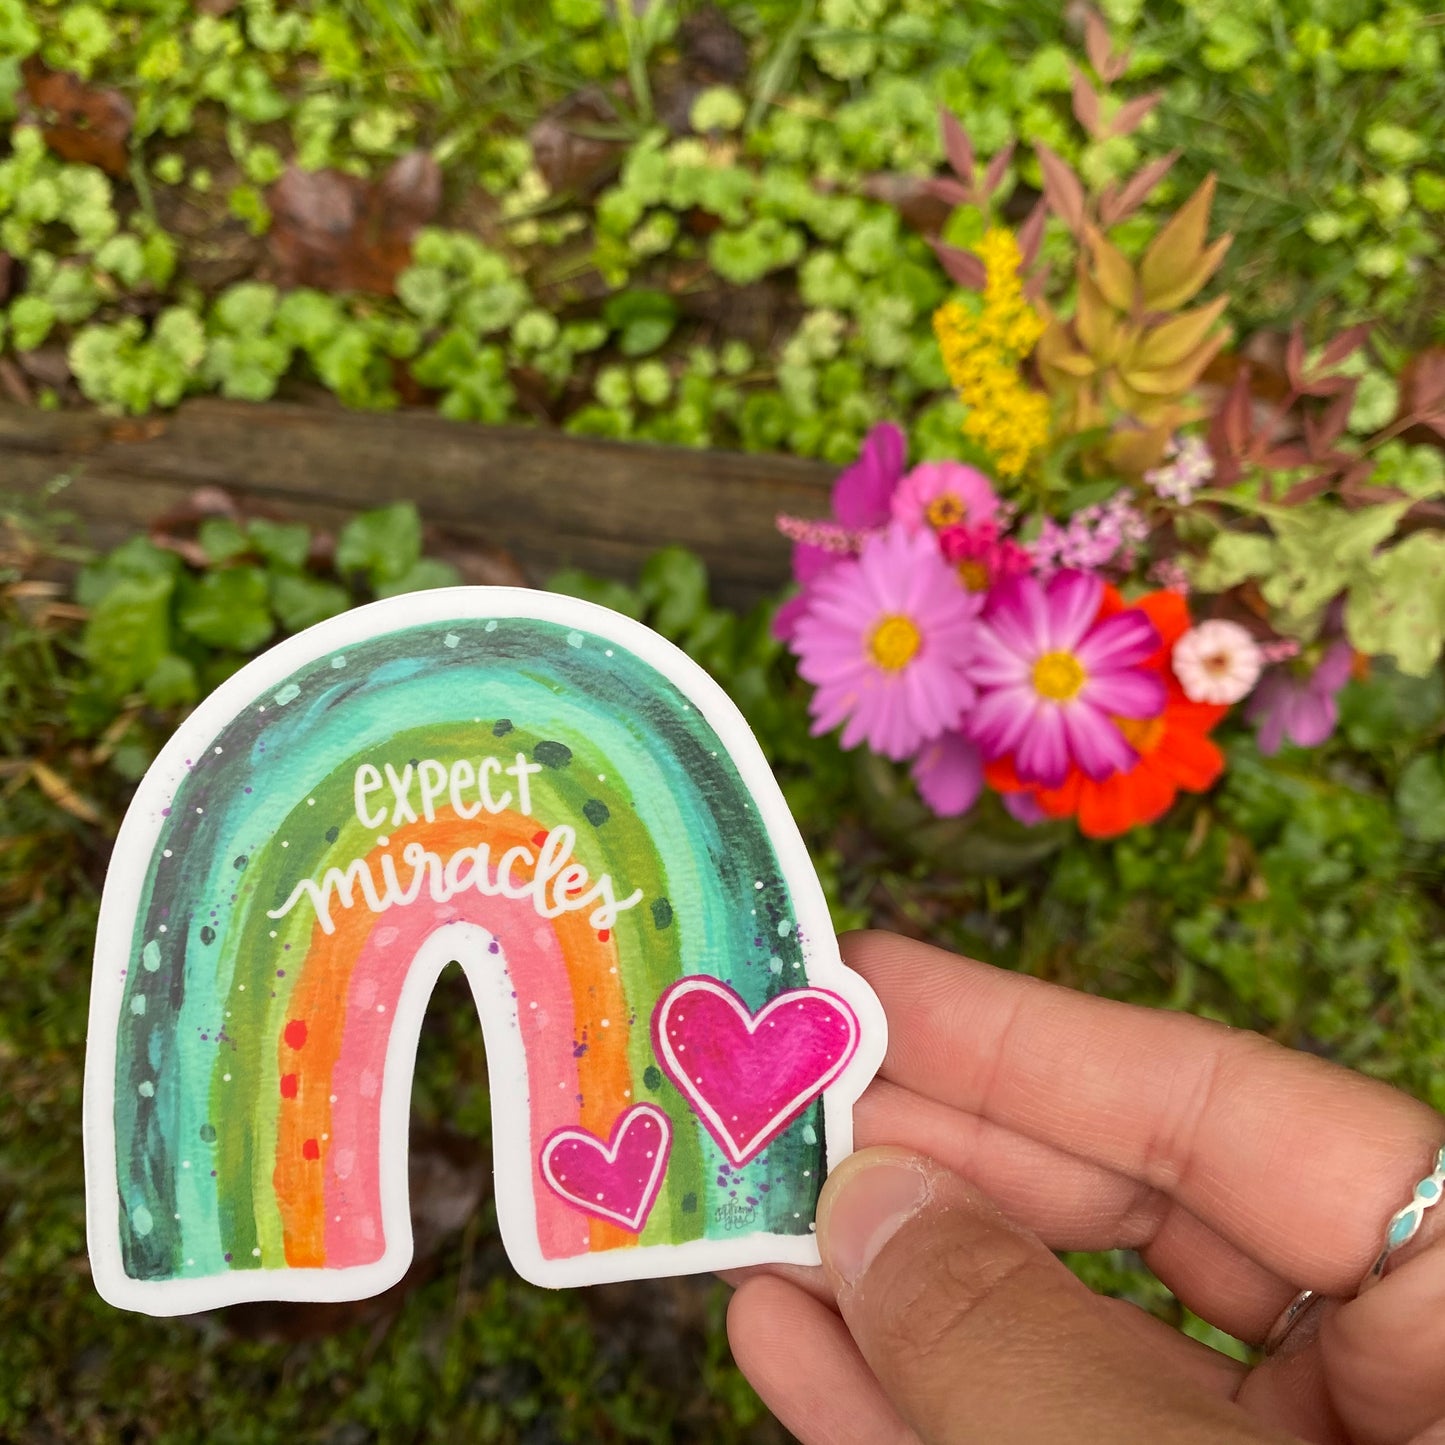 Rainbow Expect Miracles Vinyl Sticker - September Sticker of the Month